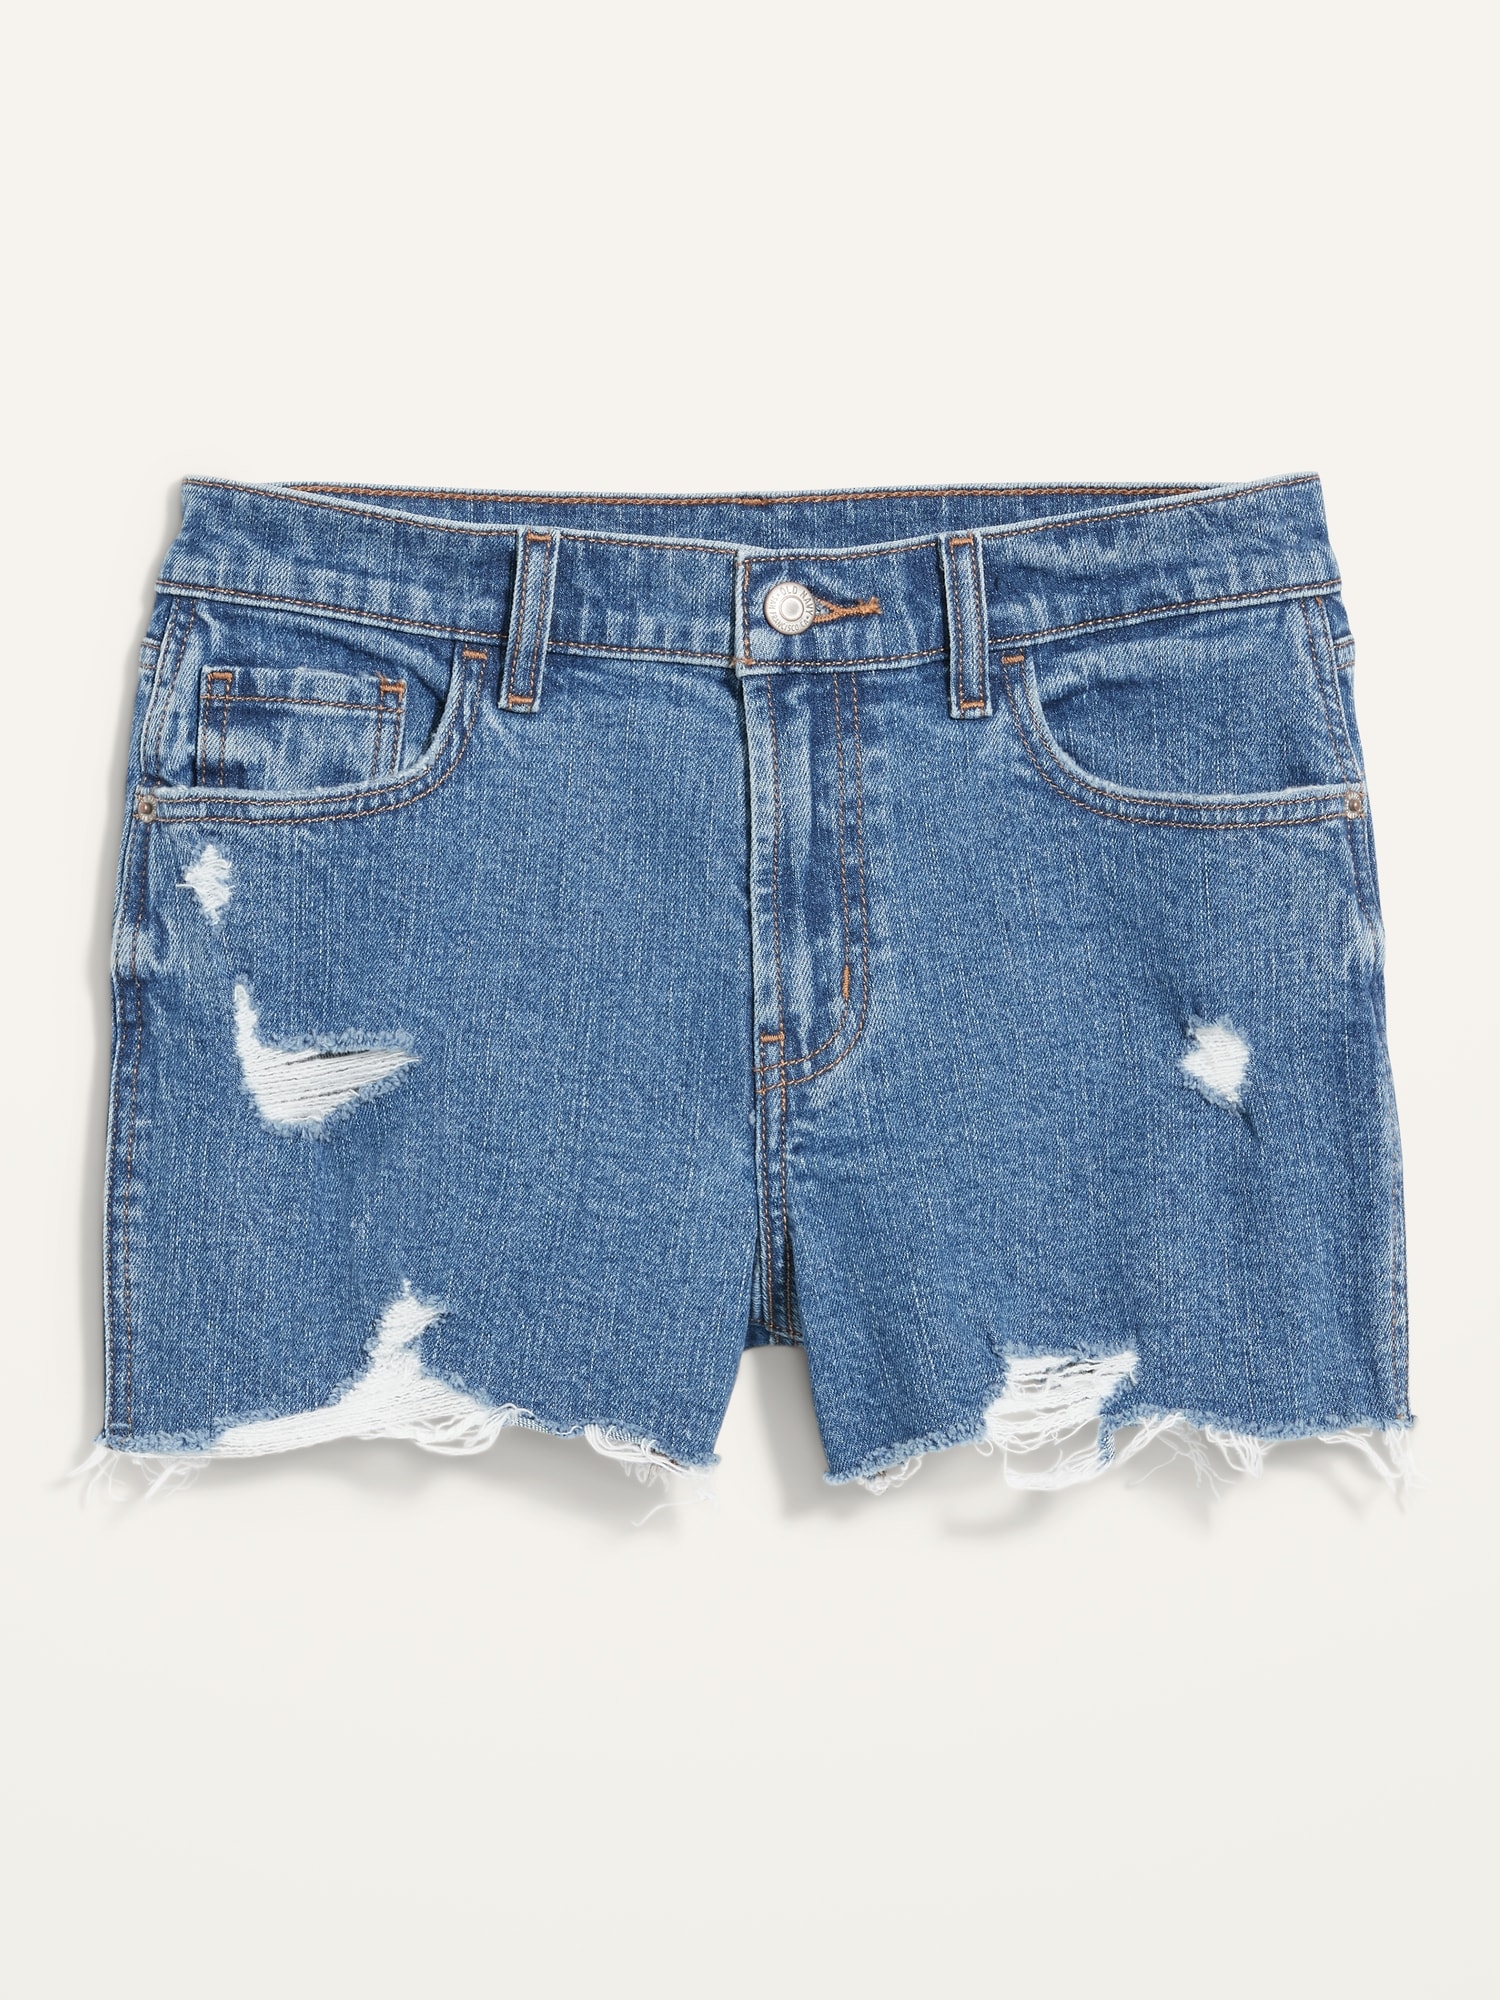 Mid-Rise Ripped Cut-Off Boyfriend Jean Shorts for Women - 3 inch inseam |  Old Navy